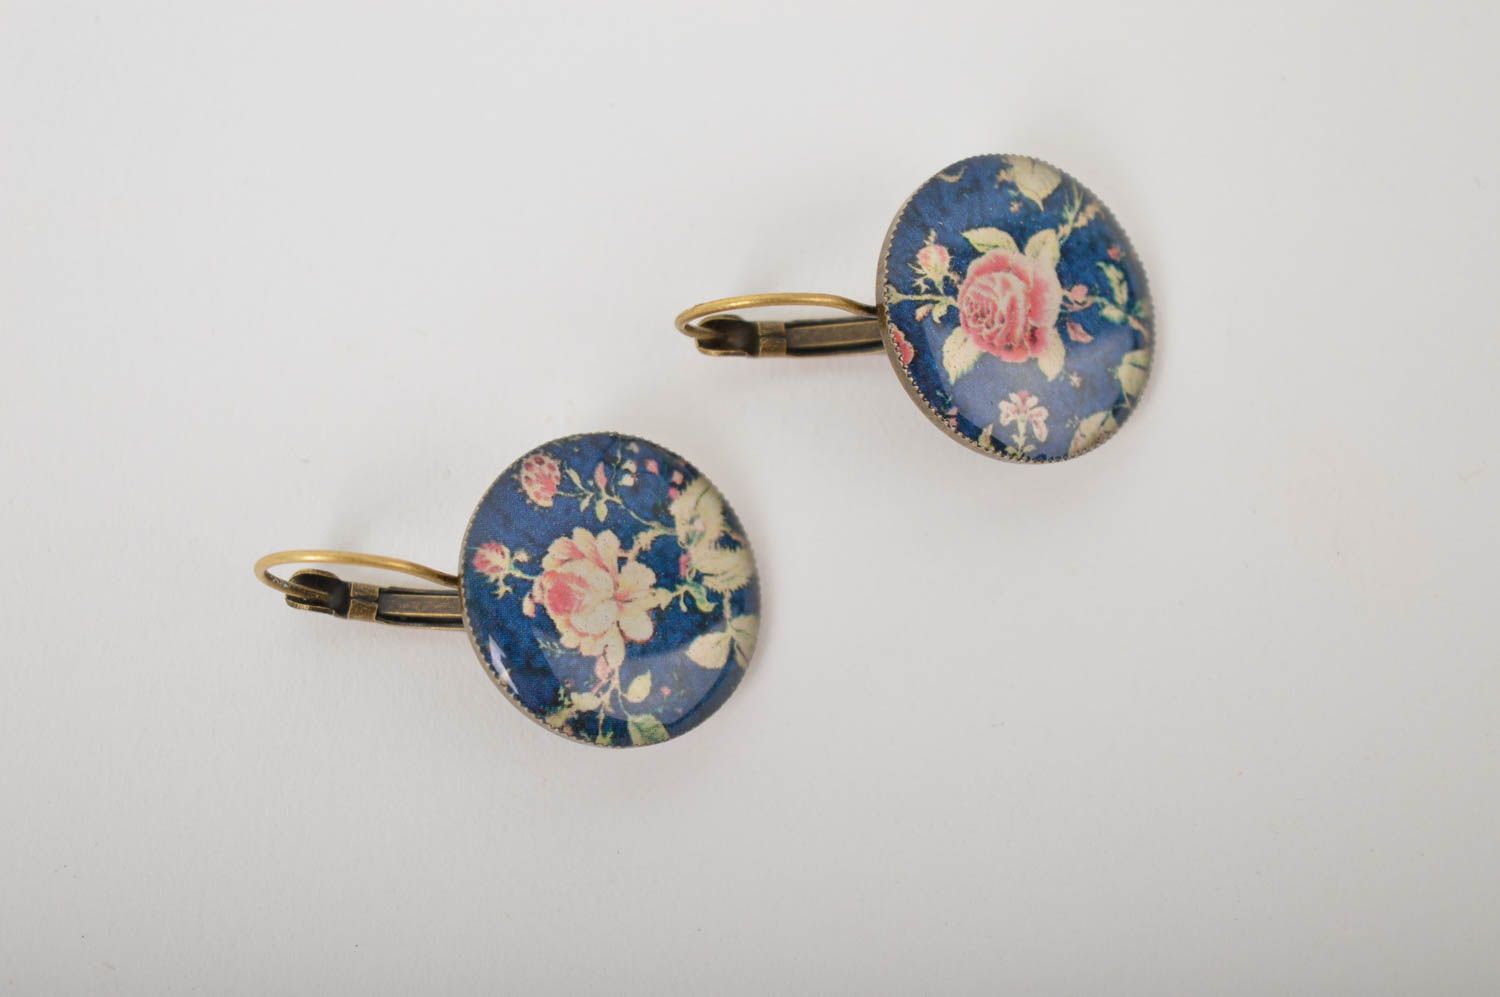 Handmade earrings cute earrings floral jewelry fashion accessories gifts for her photo 2